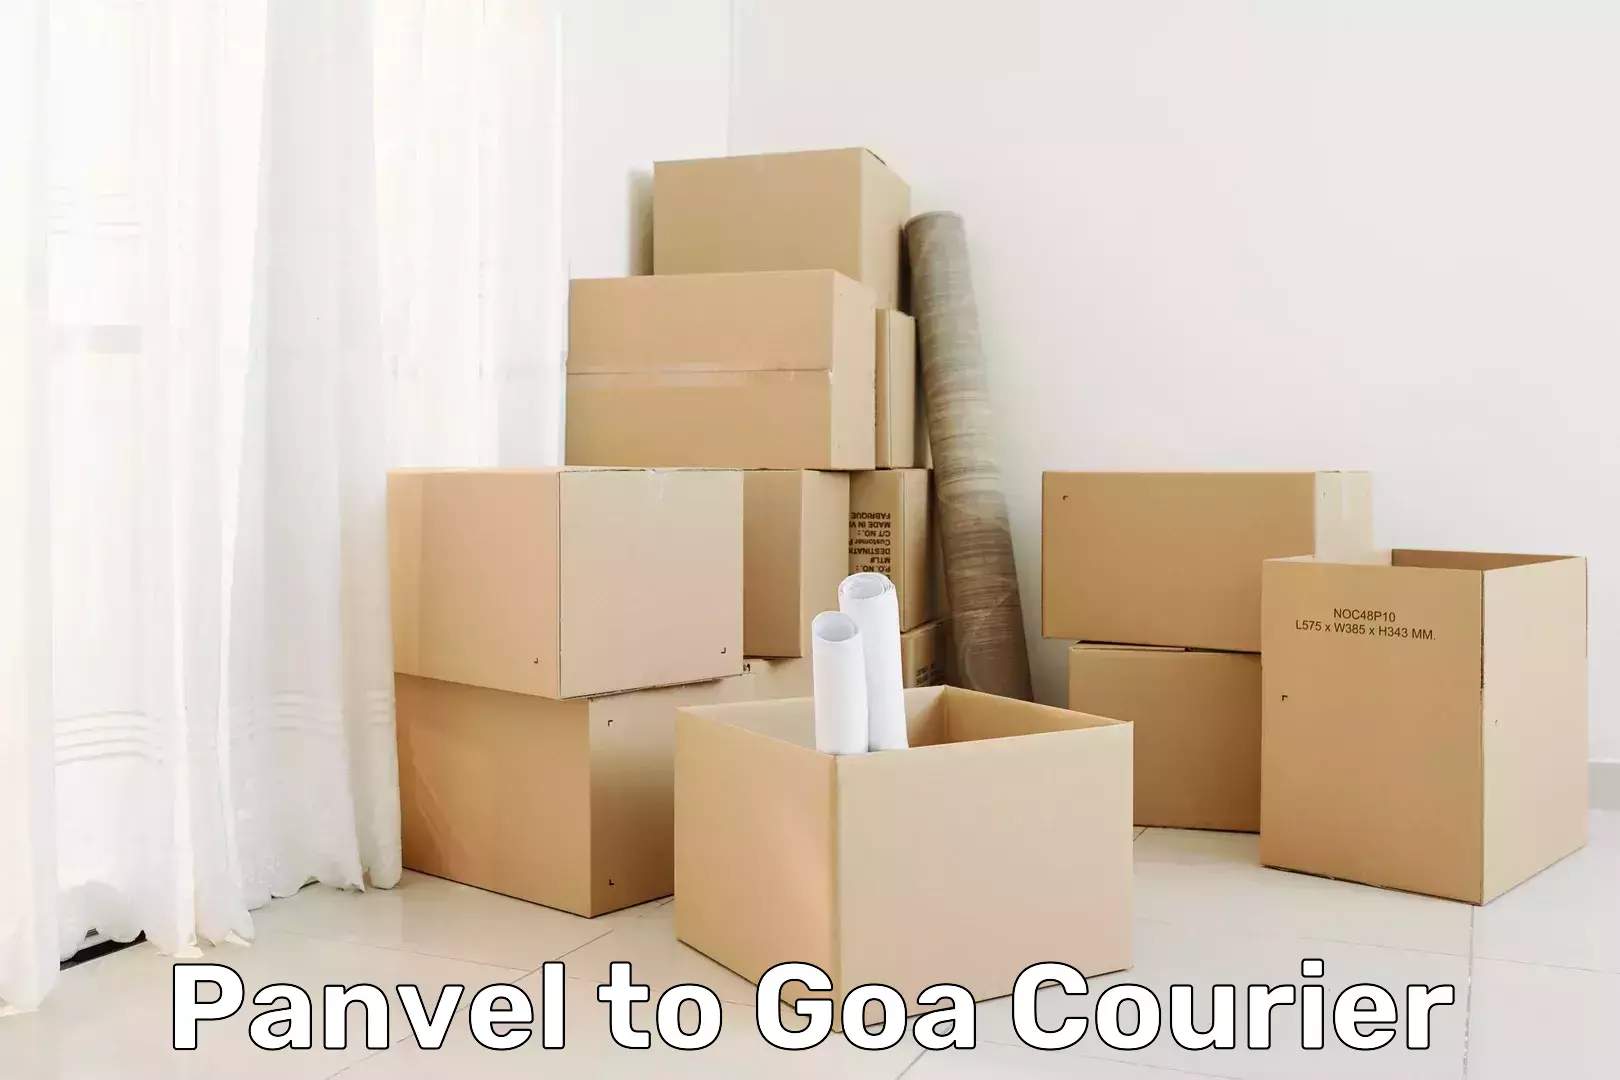 Express delivery capabilities Panvel to Panaji